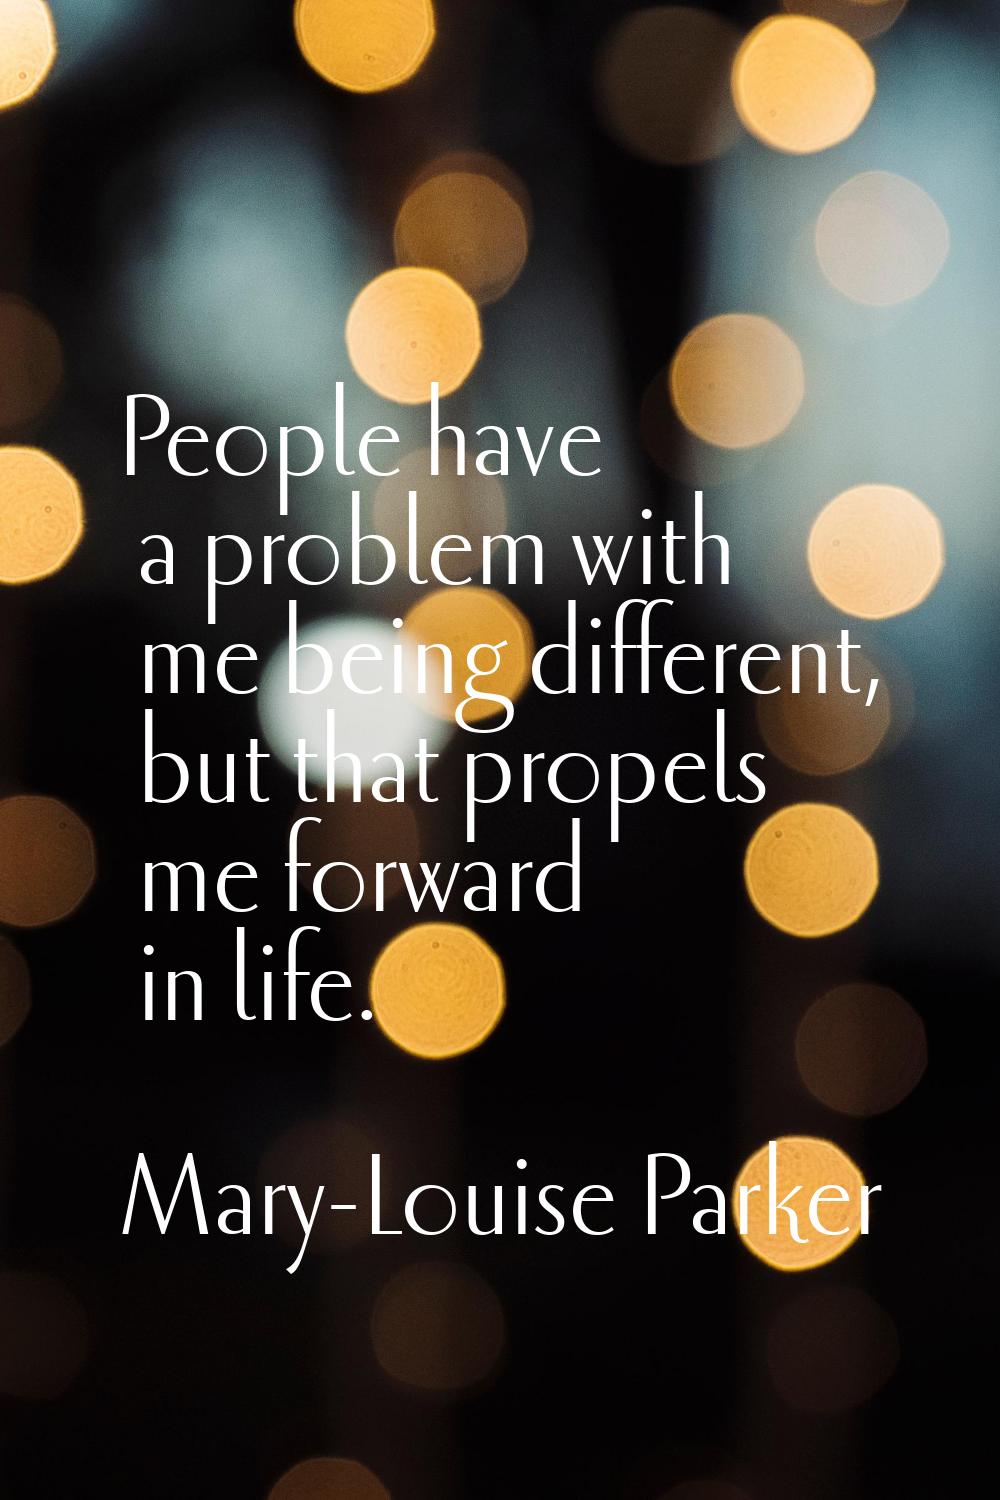 People have a problem with me being different, but that propels me forward in life.